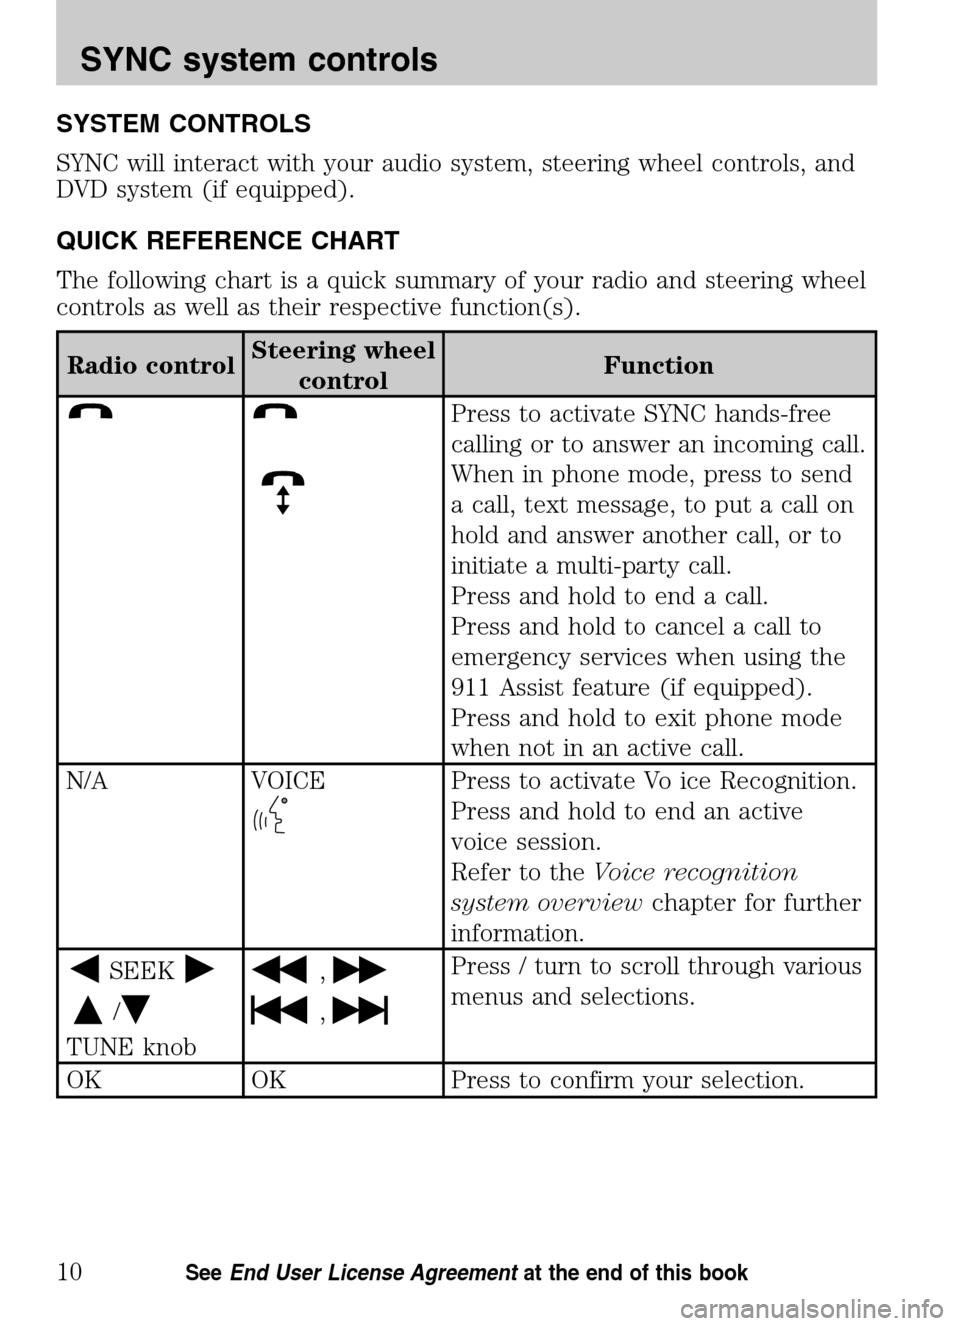 Mercury Mariner 2009  SYNC Supplement  SYSTEM CONTROLS 
SYNC will interact with your audio system, steering wheel controls, and 
DVD system (if equipped). 
QUICK REFERENCE CHART 
The following chart is a quick summary of your radio and ste